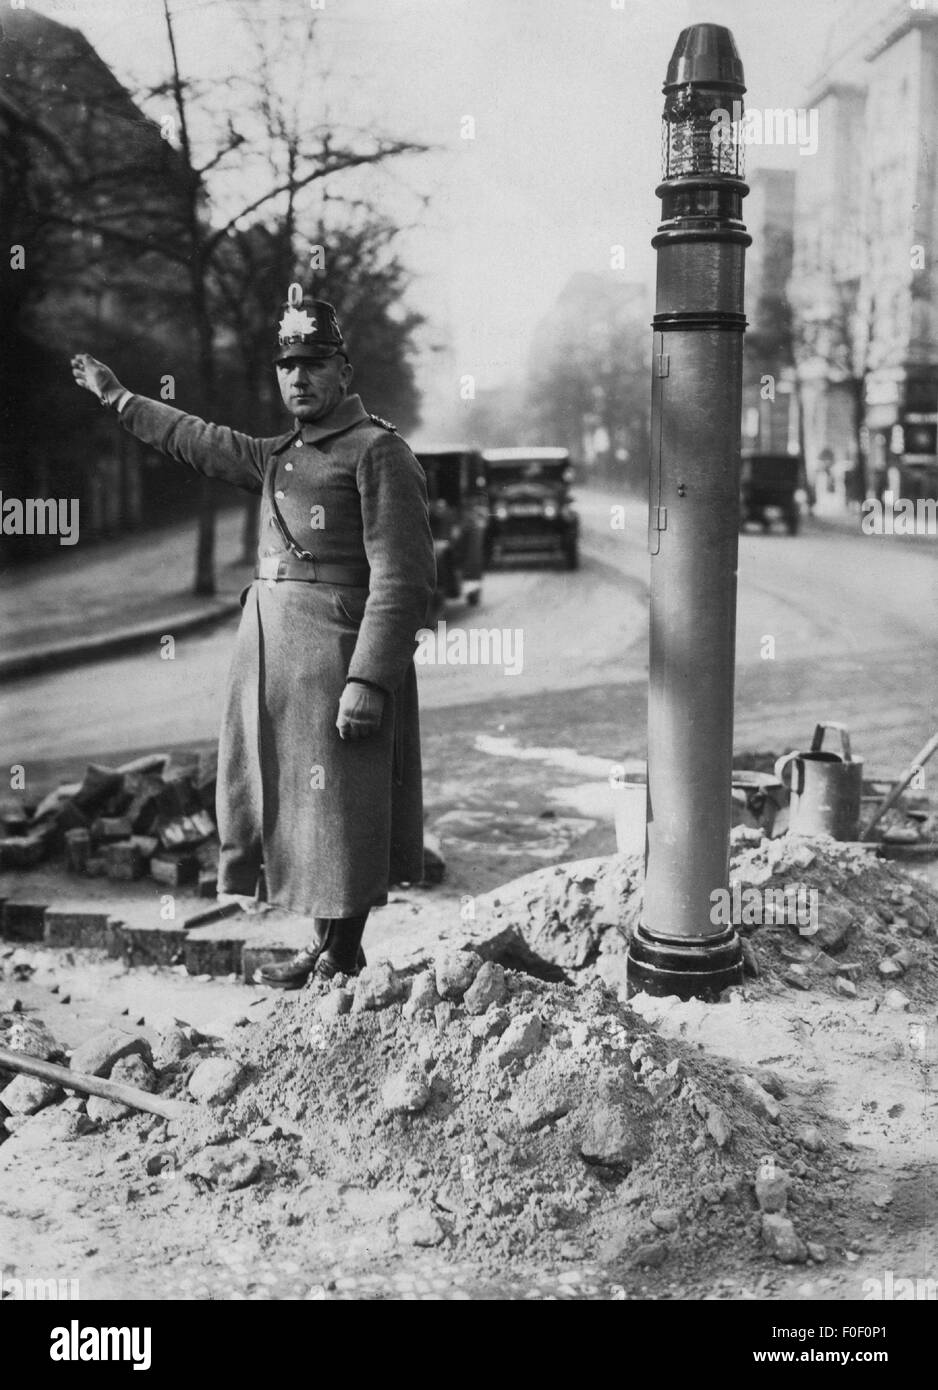 transport / transportation, car, traffic policeman besides traffic light, Cornelius Bridge, Berlin, Germany, 1924, Additional-Rights-Clearences-Not Available Stock Photo